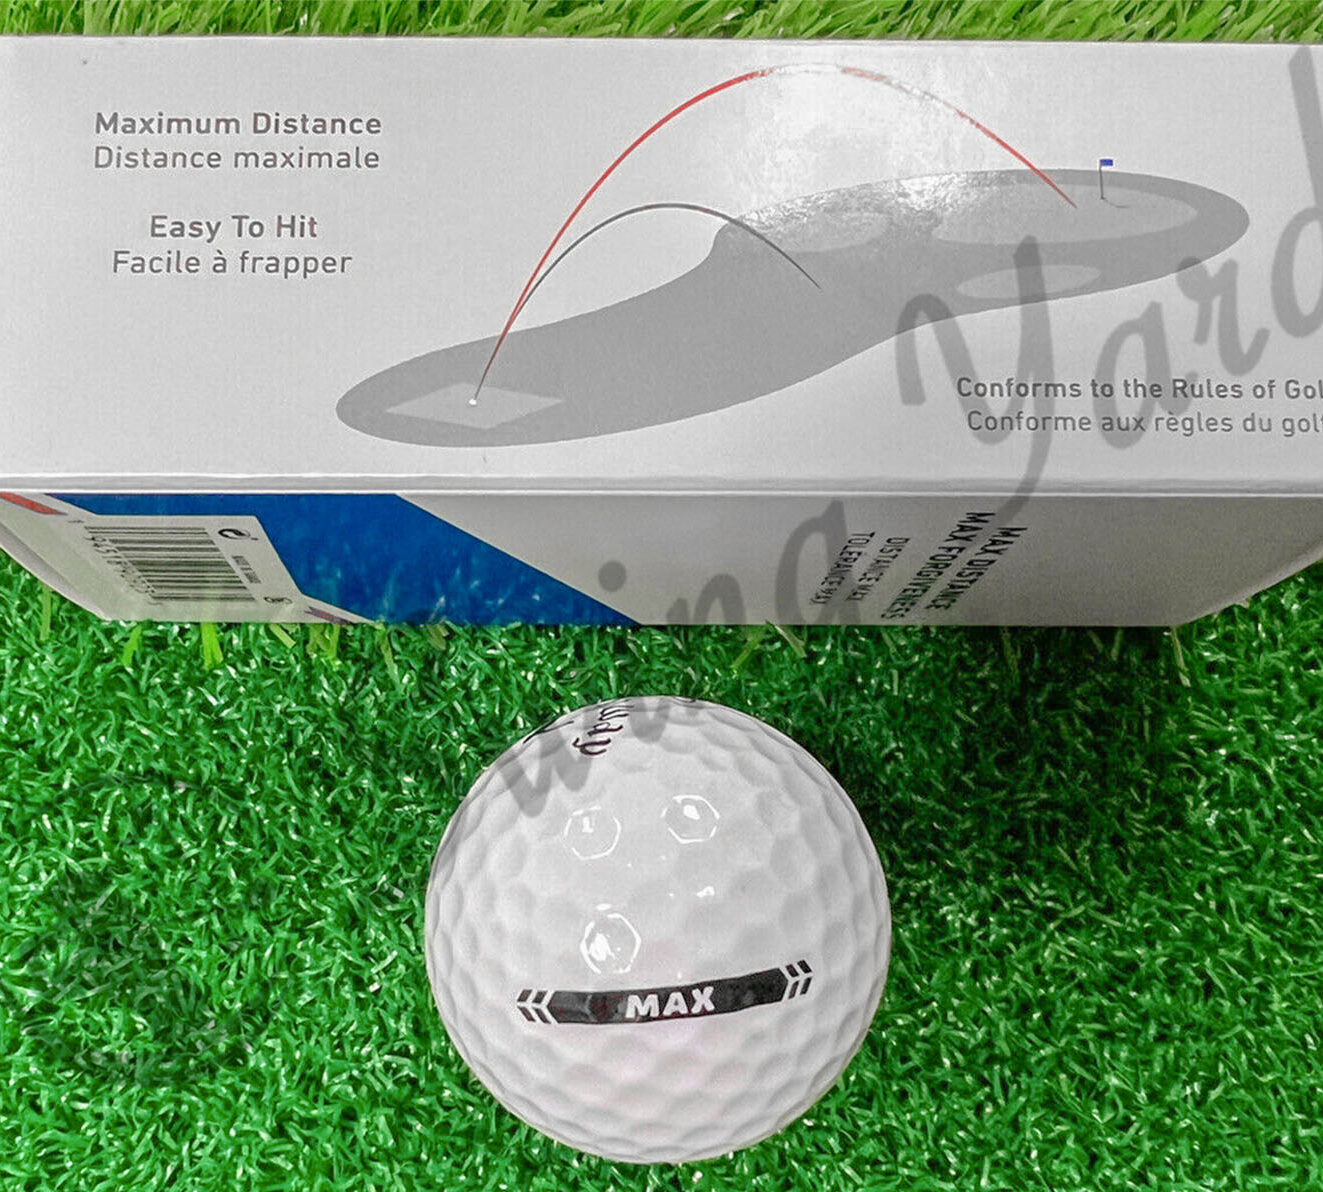 The white Callaway Supersoft Max ball with box on the practice mat